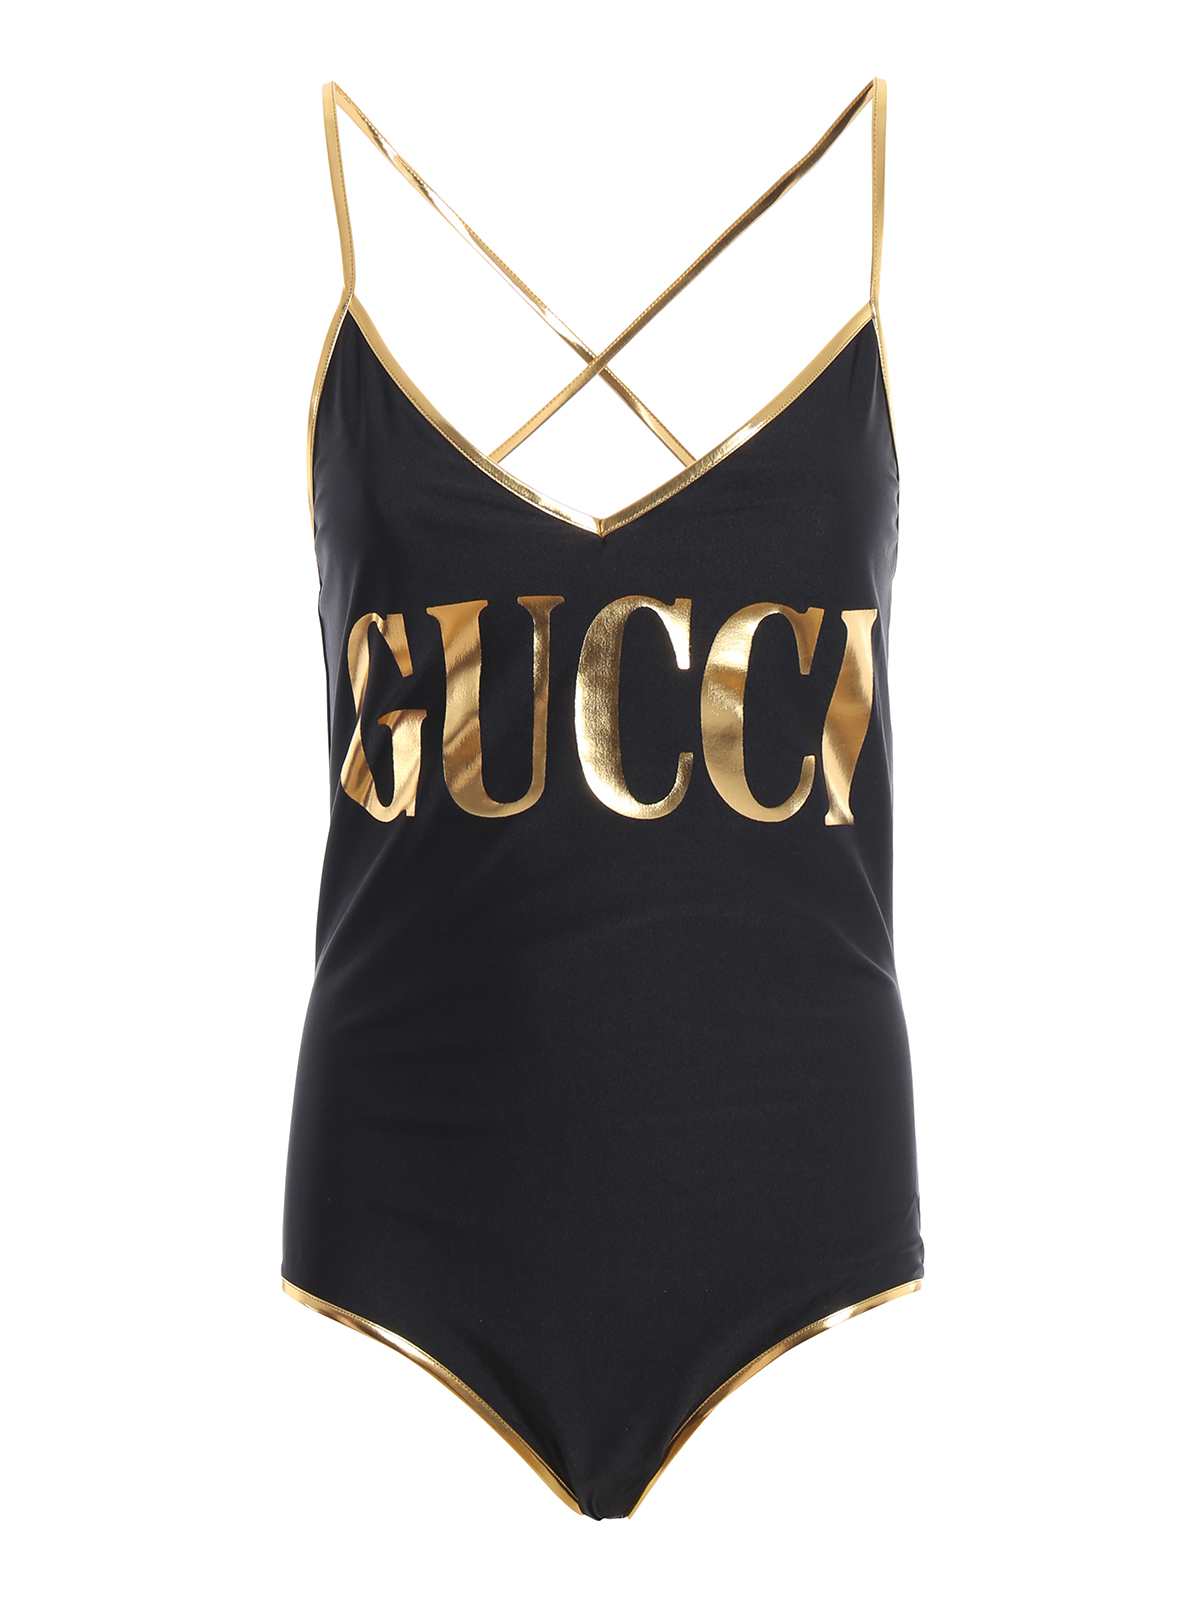 Gucci Laminated Piping Black Swimsuit